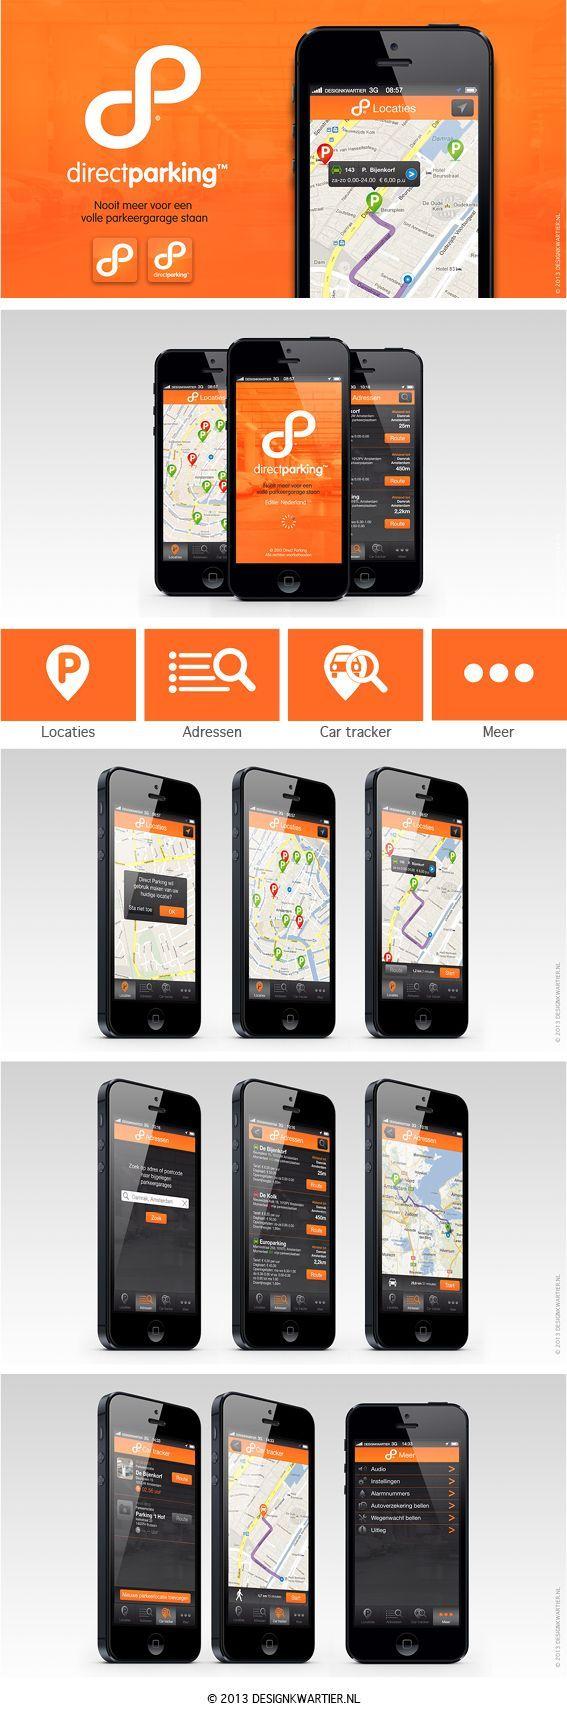 Pinterest iPhone App Logo - Pin by Doc Holladay on UX Design | Pinterest | App design, App logo ...